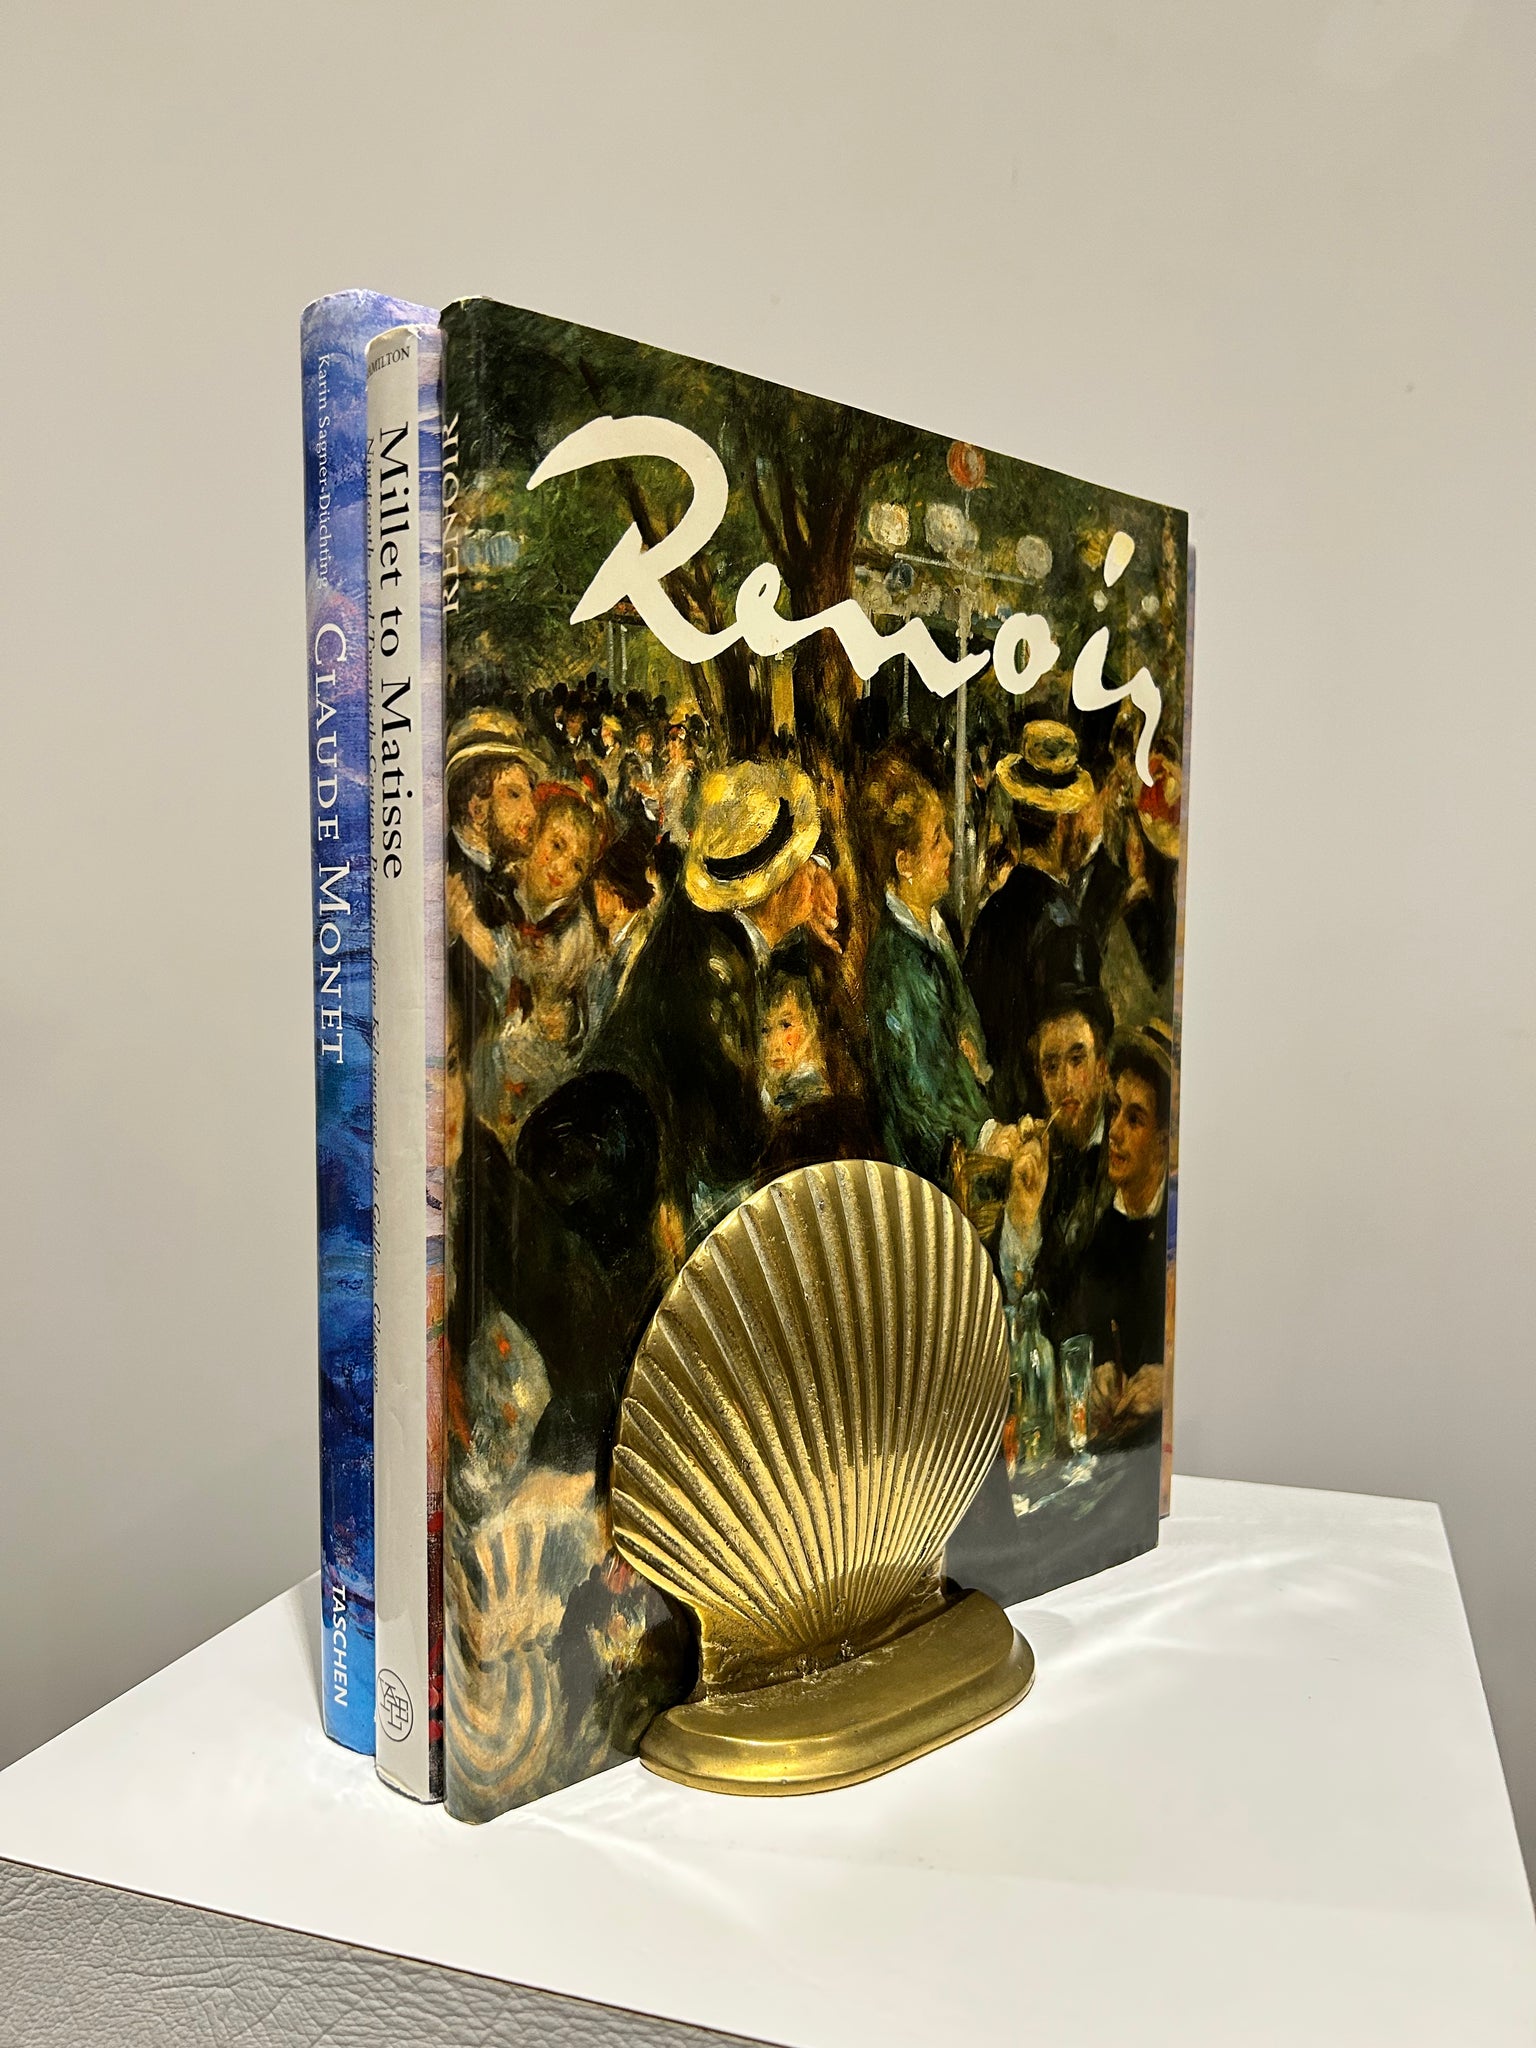 Solid brass seashell bookends